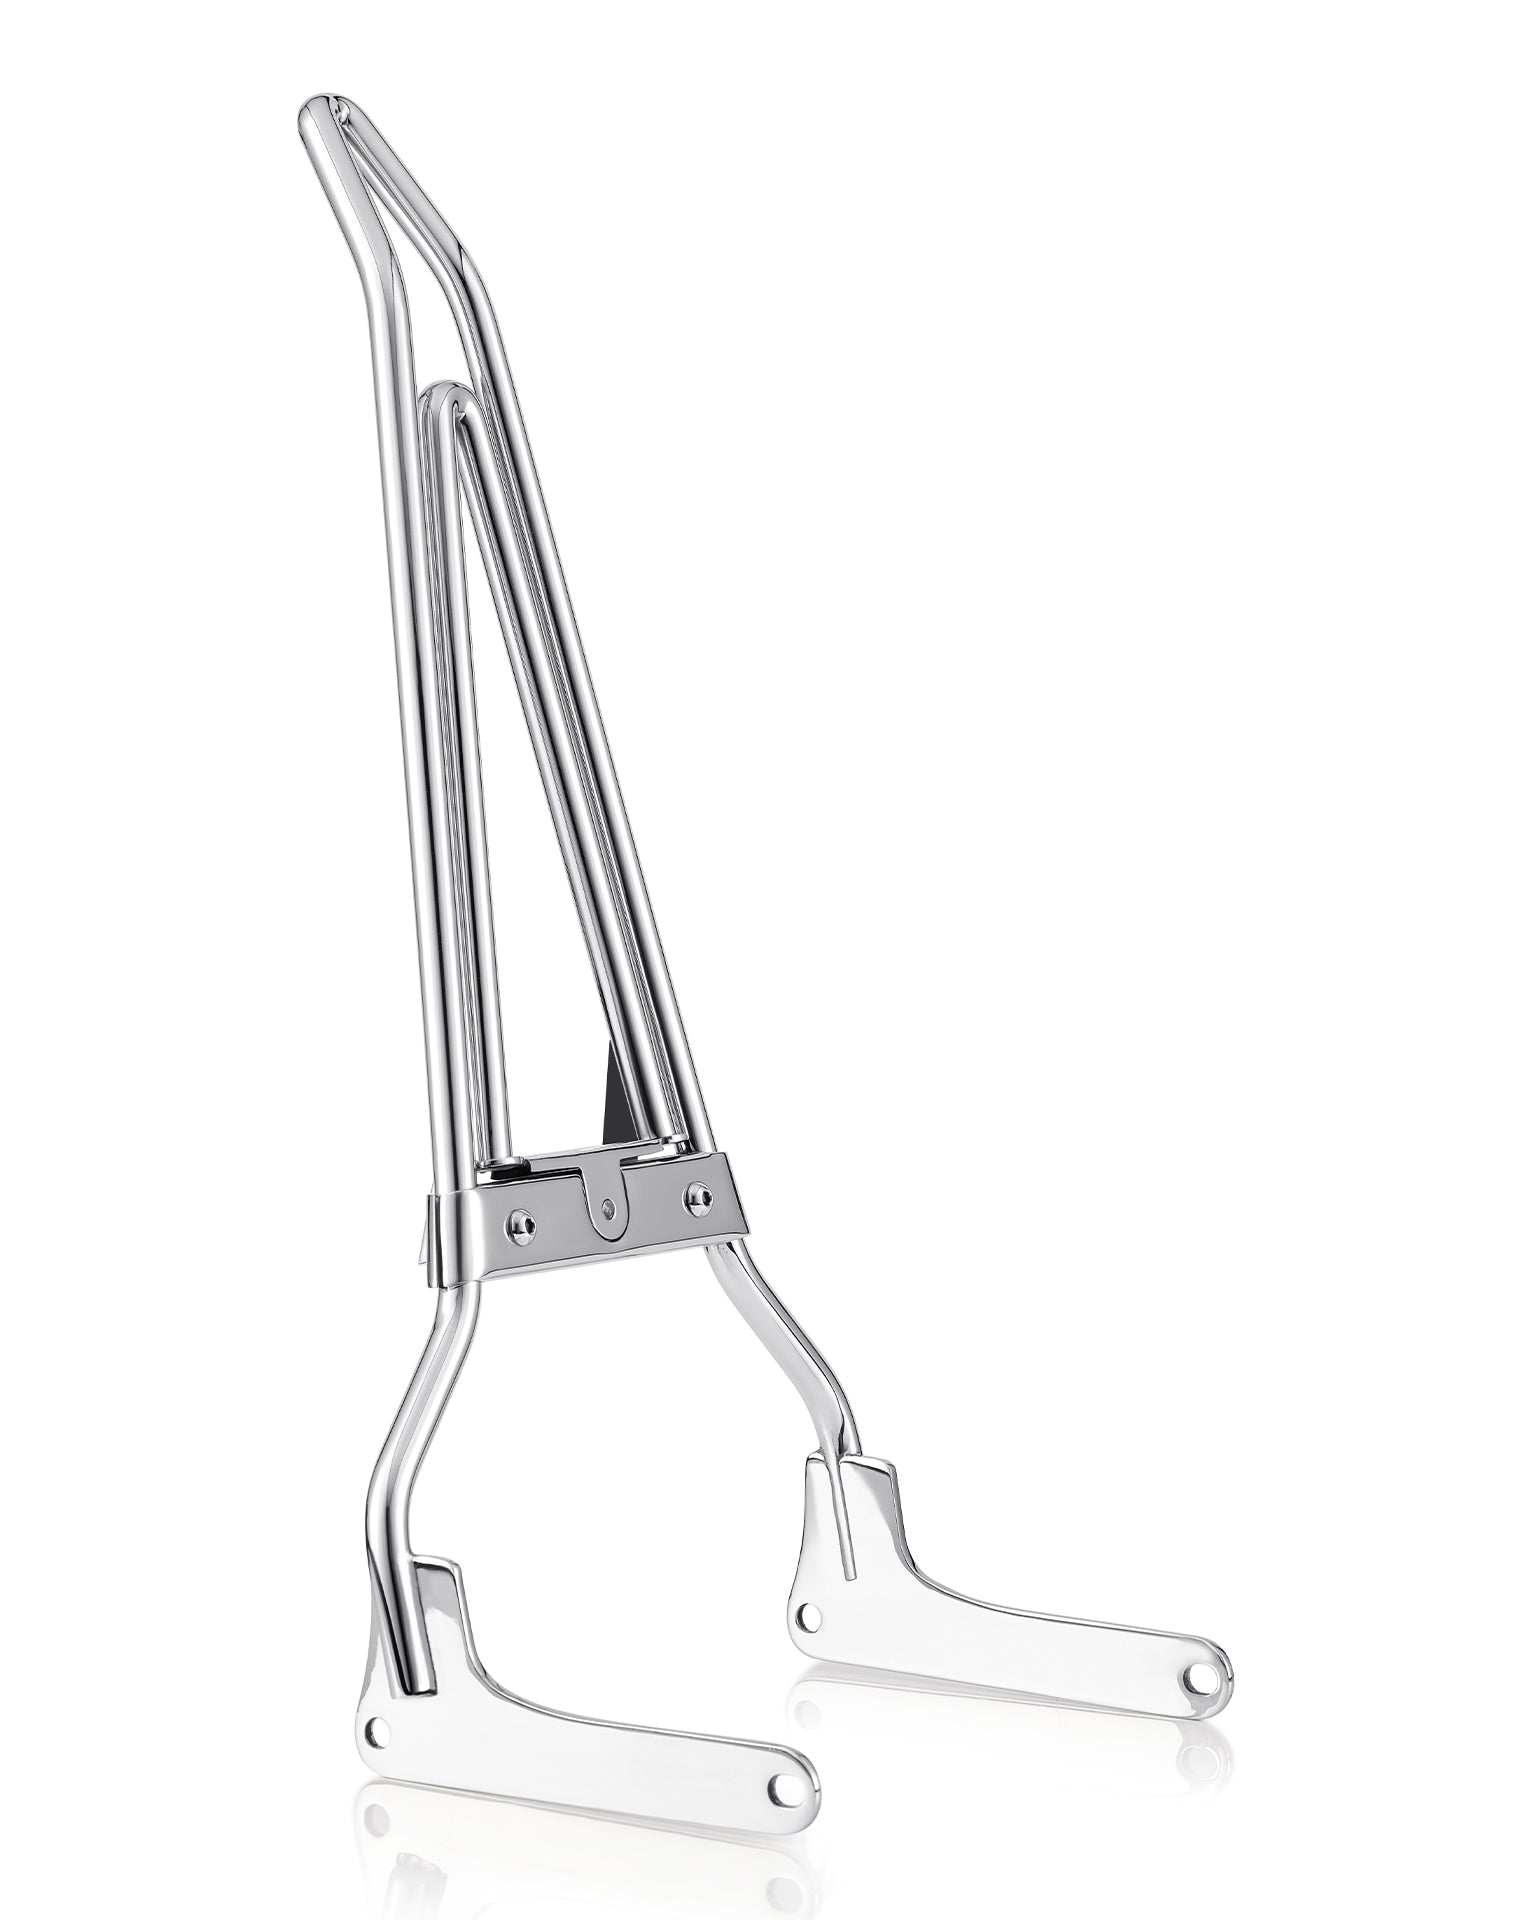 Iron Born Blade 25" Sissy Bar w/ Foldable Luggage Rack for Harley Softail Low Rider ST FXLRST Chrome